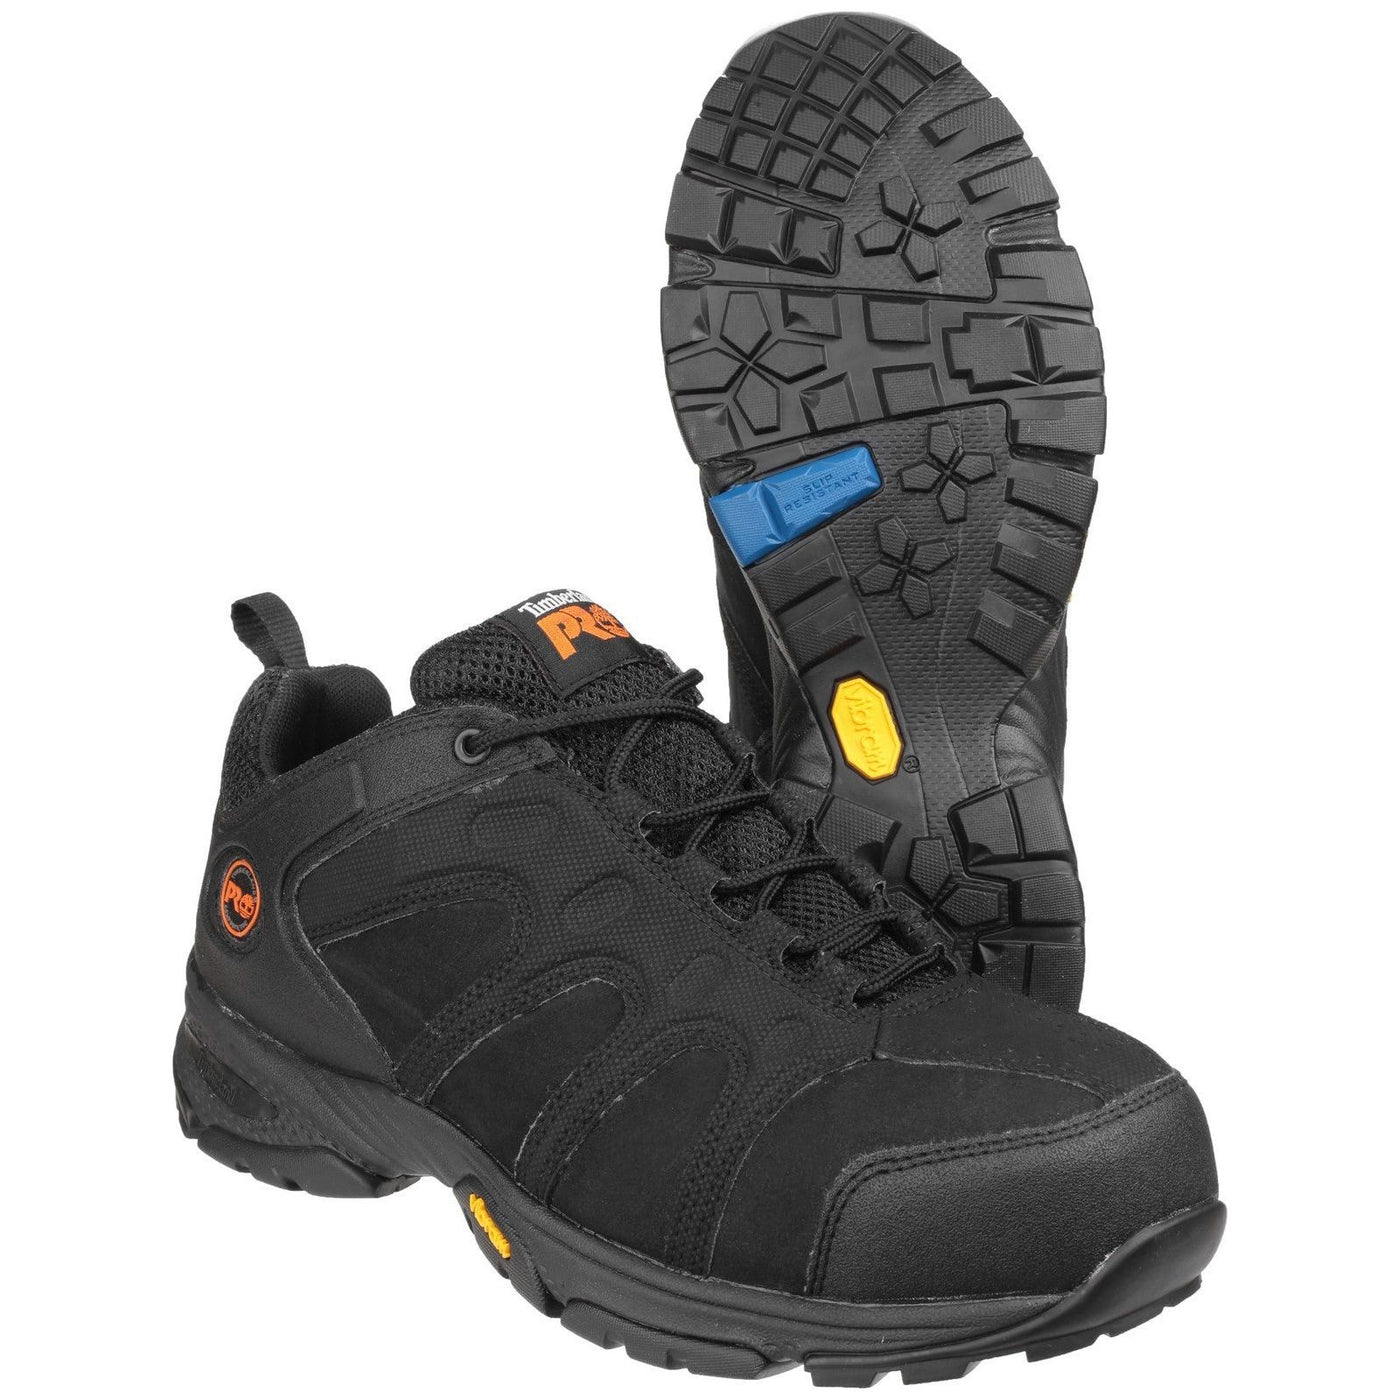 Timberland Wildcard Safety Shoes - Mens